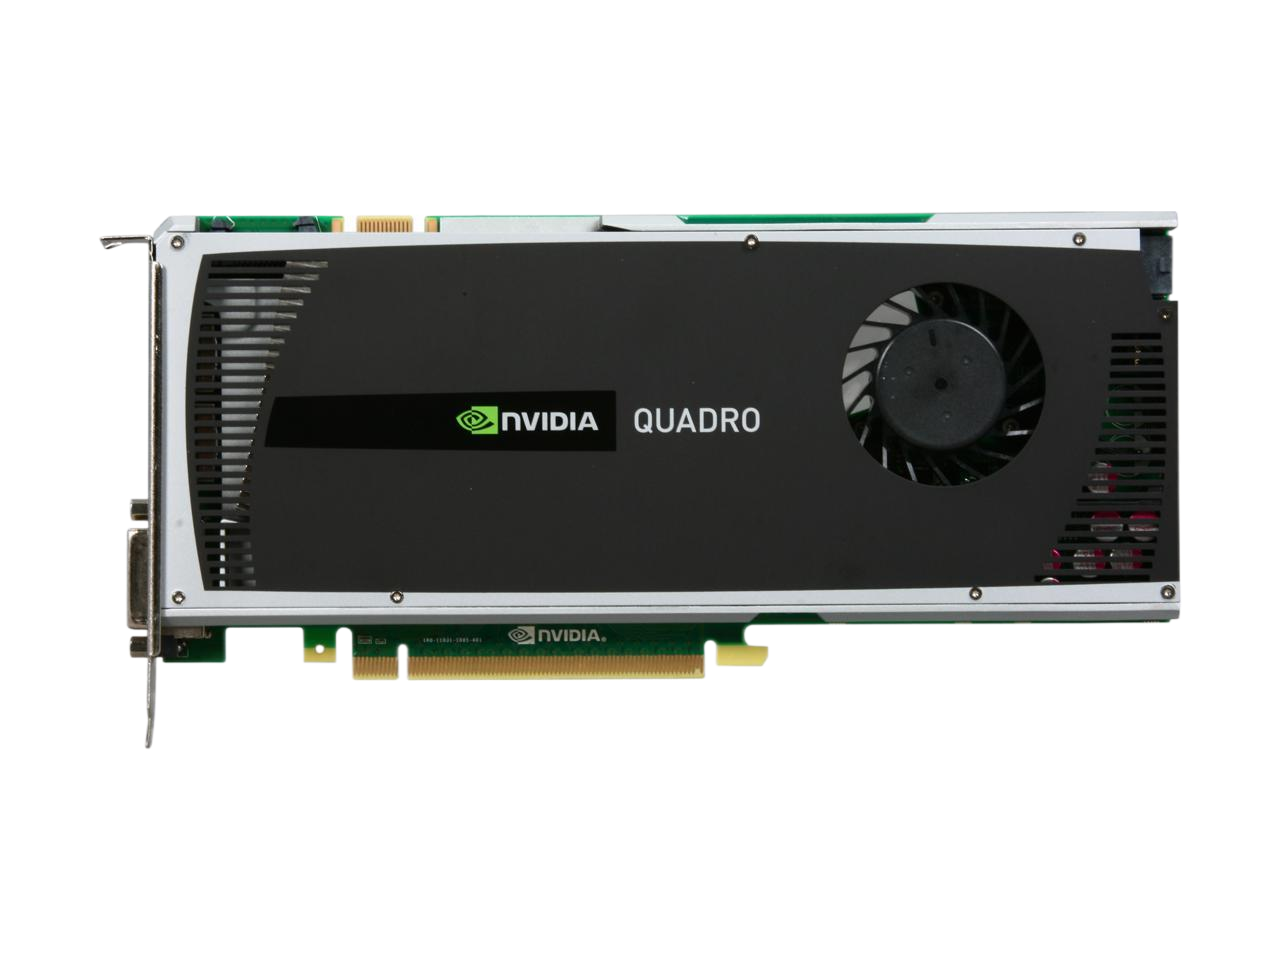 NVIDIA Quadro 4000 2GB GDDR5 PCI-E x16 2.0 Graphics Video Card With DVI and DisplayPort Outputs 38XNM Standard Height Workstation Video Card